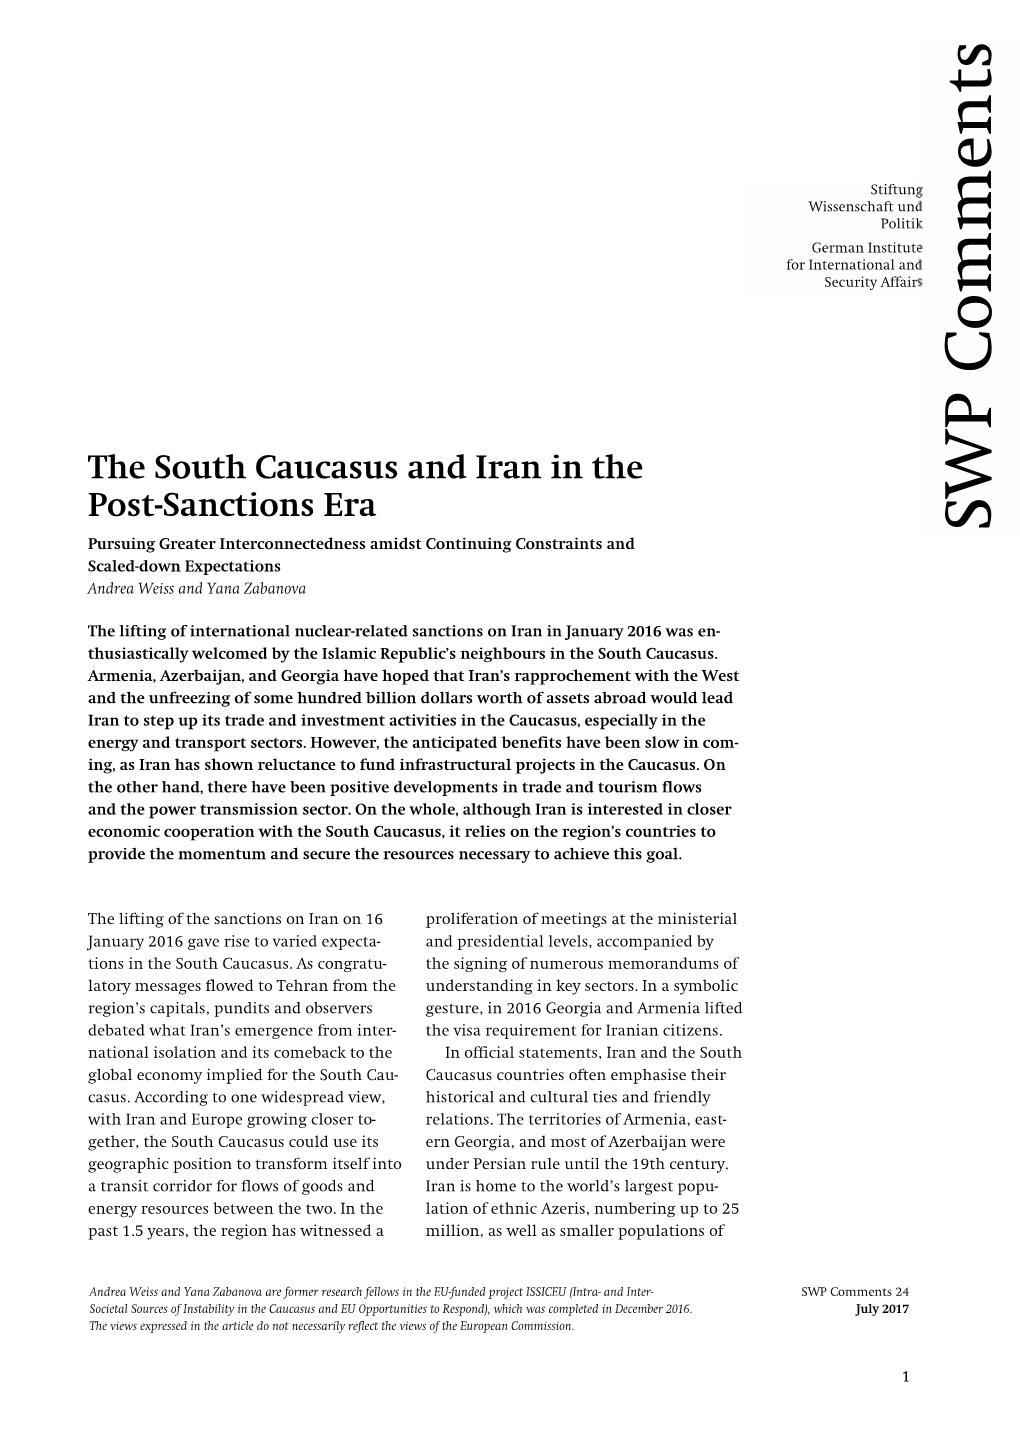 The South Caucasus and Iran in The